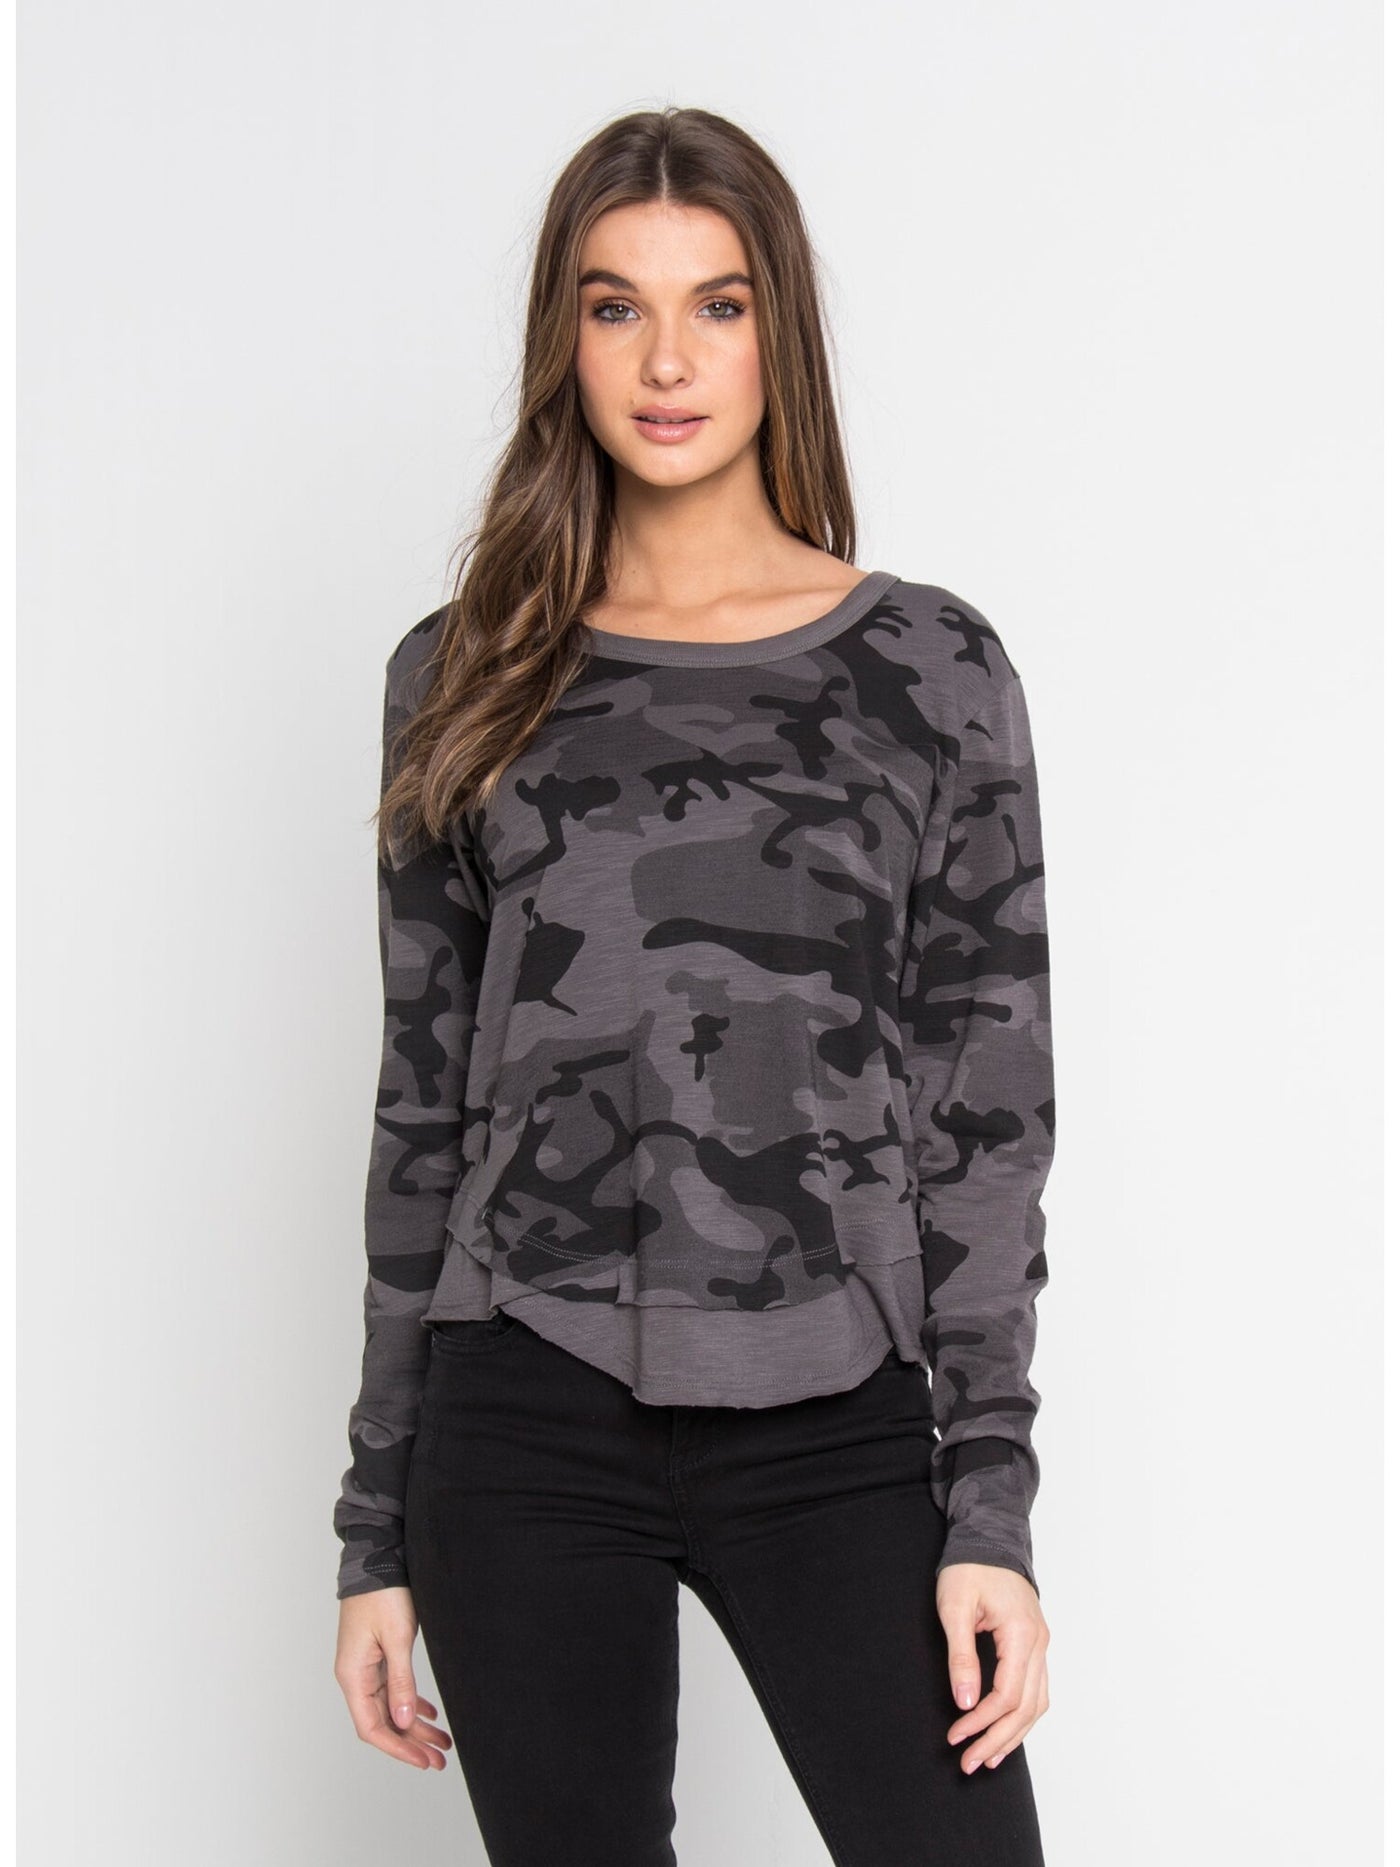 CHRLDR Womens Gray Camouflage Long Sleeve Scoop Neck Top XS